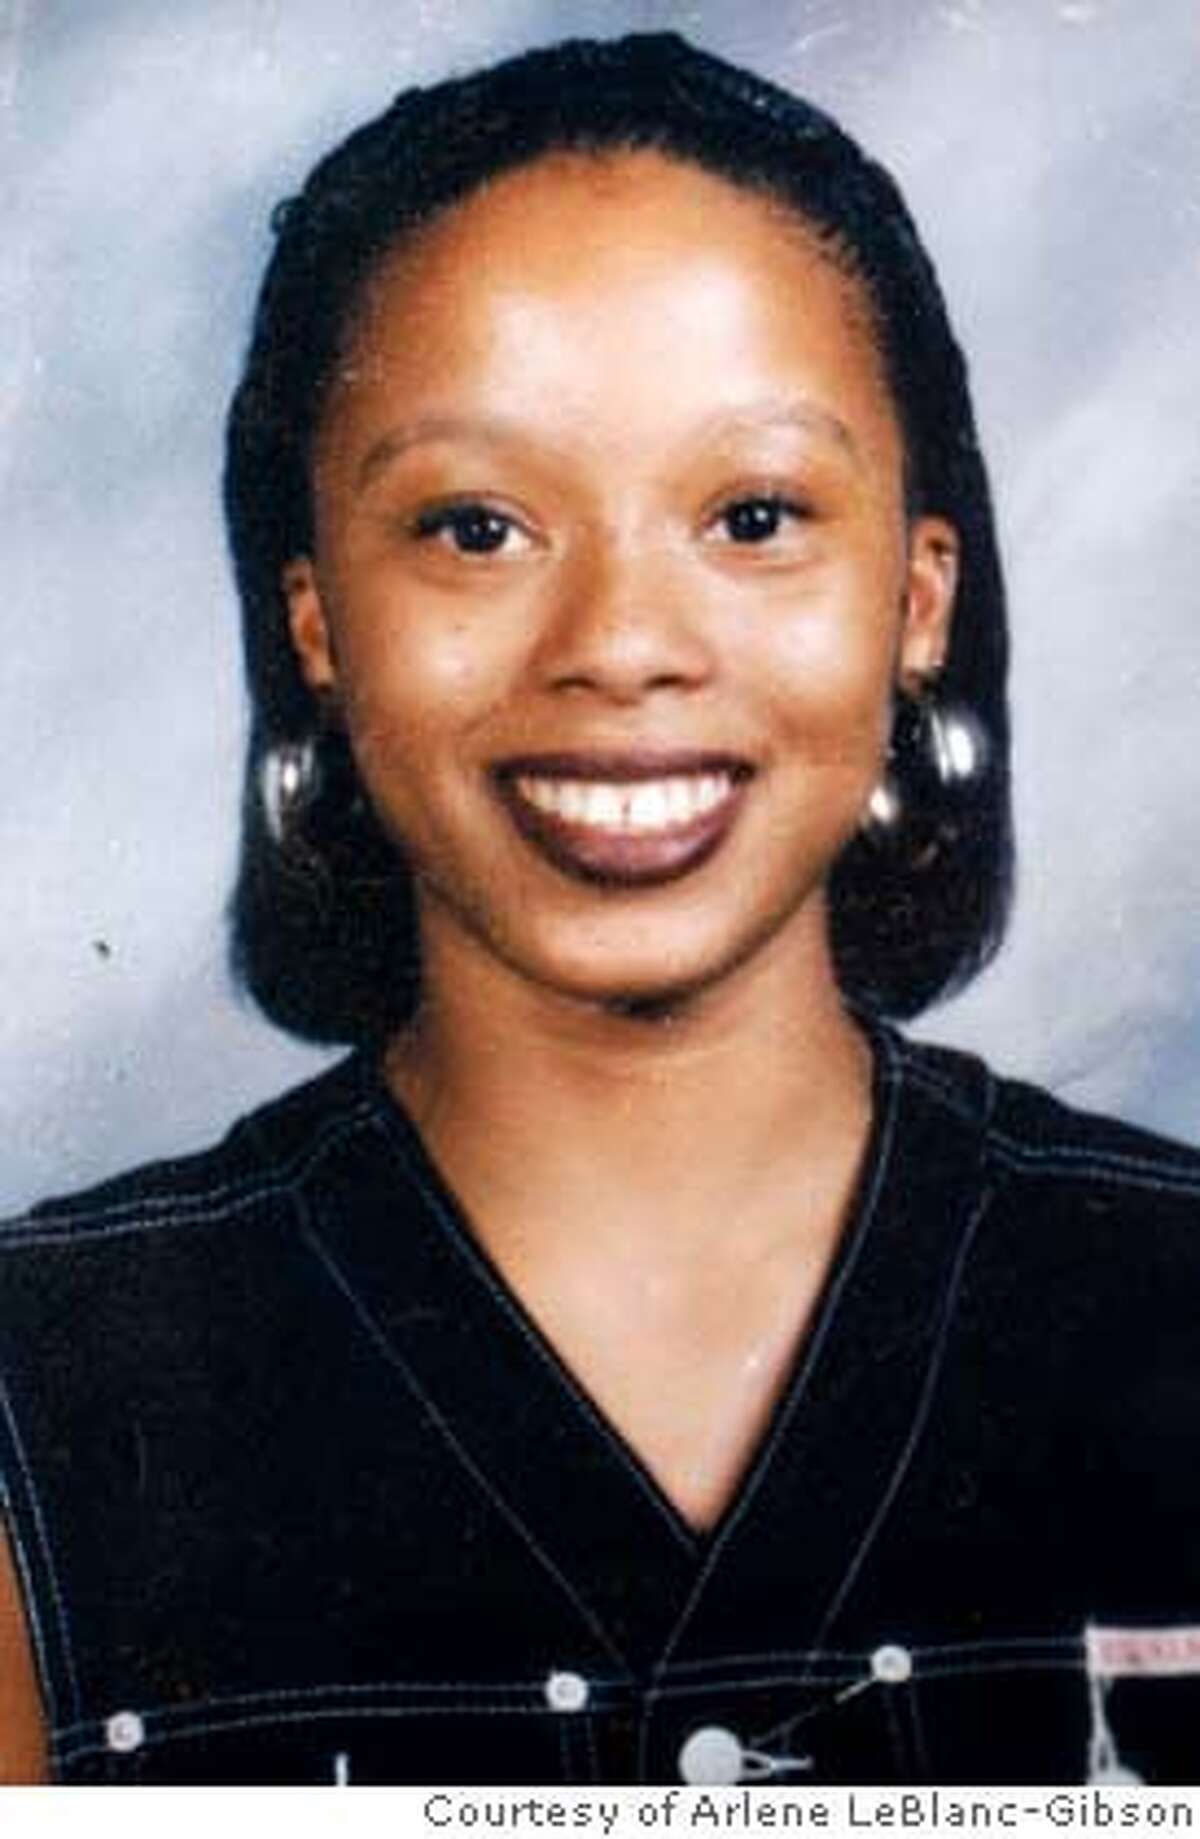 A school portrait of Evelyna LeBlanc taken shortly before her death in 1994 was provided by her mother Arlene LeBlanc-Gibson in Oakland, Calif. on Thursday, May 3, 2007. Evelyna was raped and murdered after attending a high school football game in 1994 at the age of 15. Now police in Oregon have a man in custody on unrelated charges and have linked 27-year-old Inani Charles Williams to her murder using DNA evidence. PHOTO COURTESY OF ARLENE LeBLANC-GIBSON **Arlene LeBlanc-Gibson, Evelyna LeBlanc, Inani Charles Williams